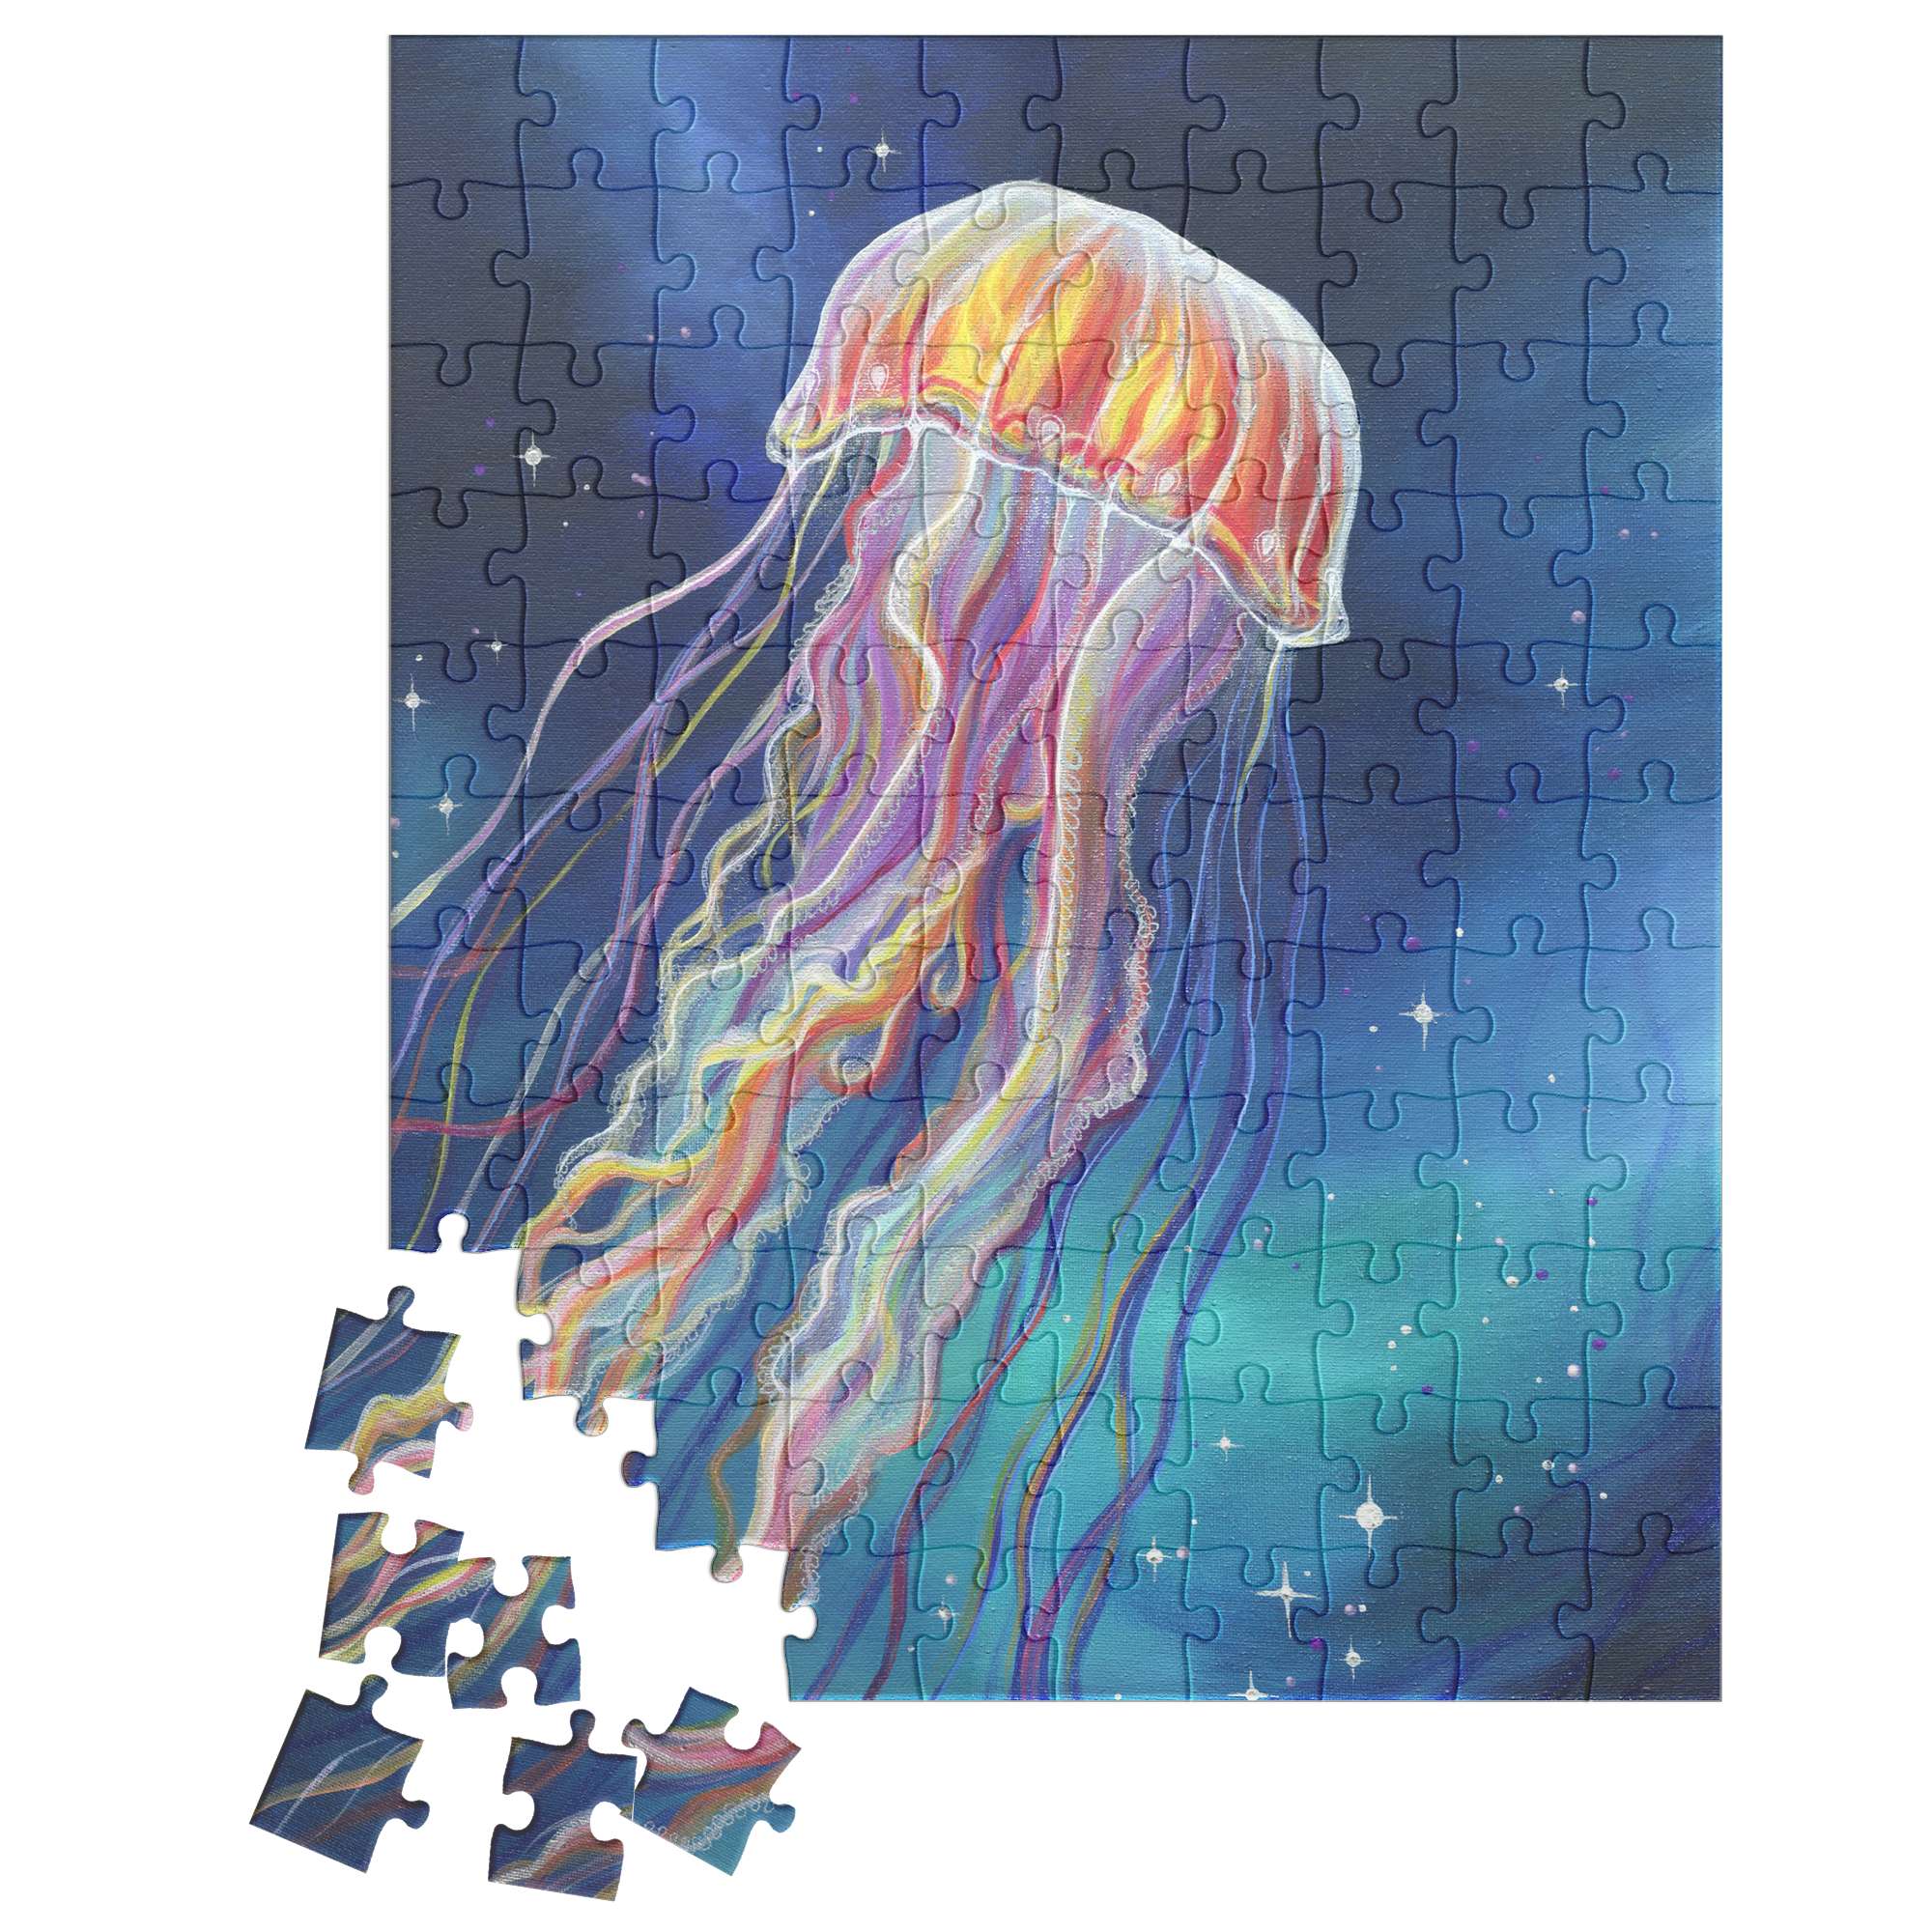 Jellyfish Puzzle with a few loose pieces, depicting a colorful jellyfish against a starry night sky background.